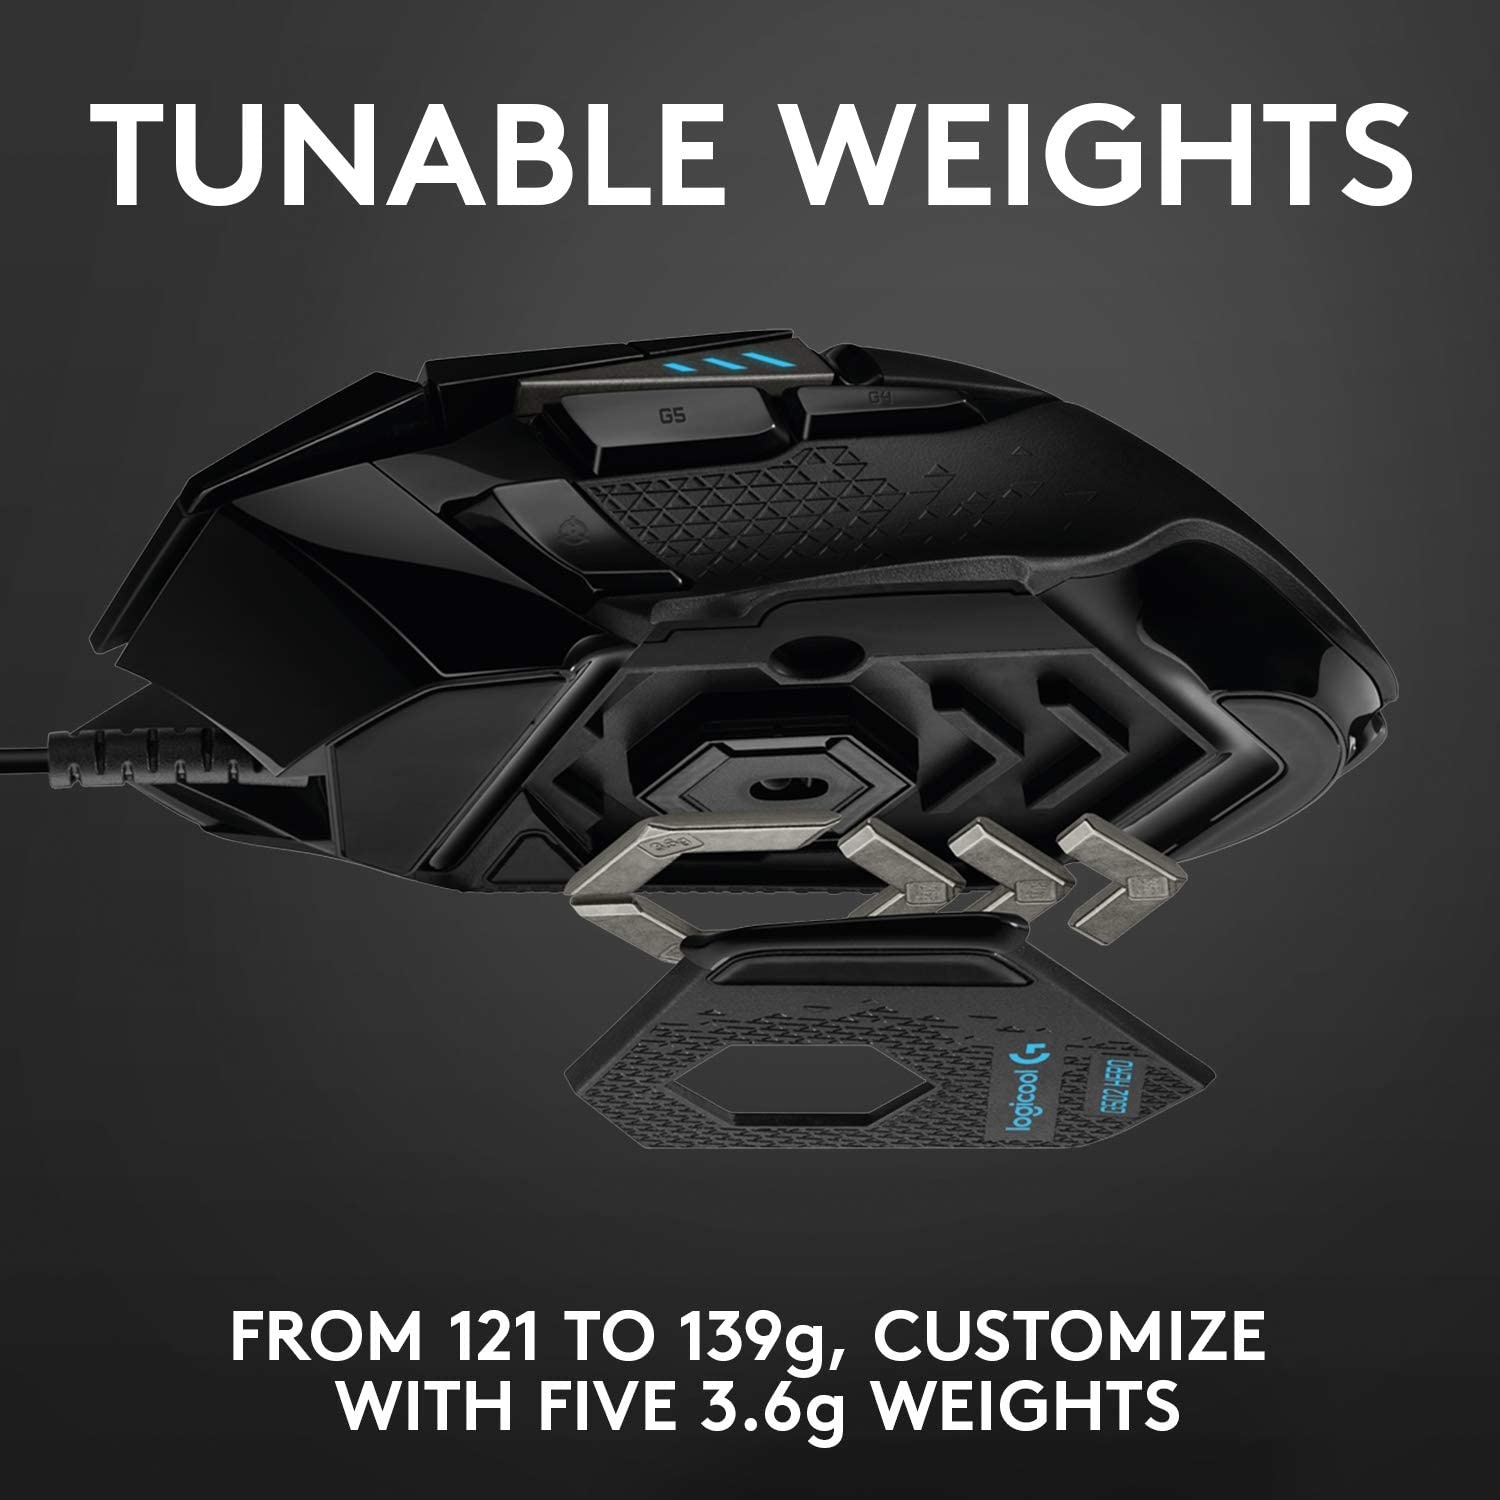 Logitech G502 Proteus Spectrum RGB Tunable Gaming Mouse, 12,000 DPI  On-The-Fly DPI Shifting, Personalized Weight and Balance Tuning with (5)  3.6g Weights, 11 Programmable Buttons - NWCA Inc.